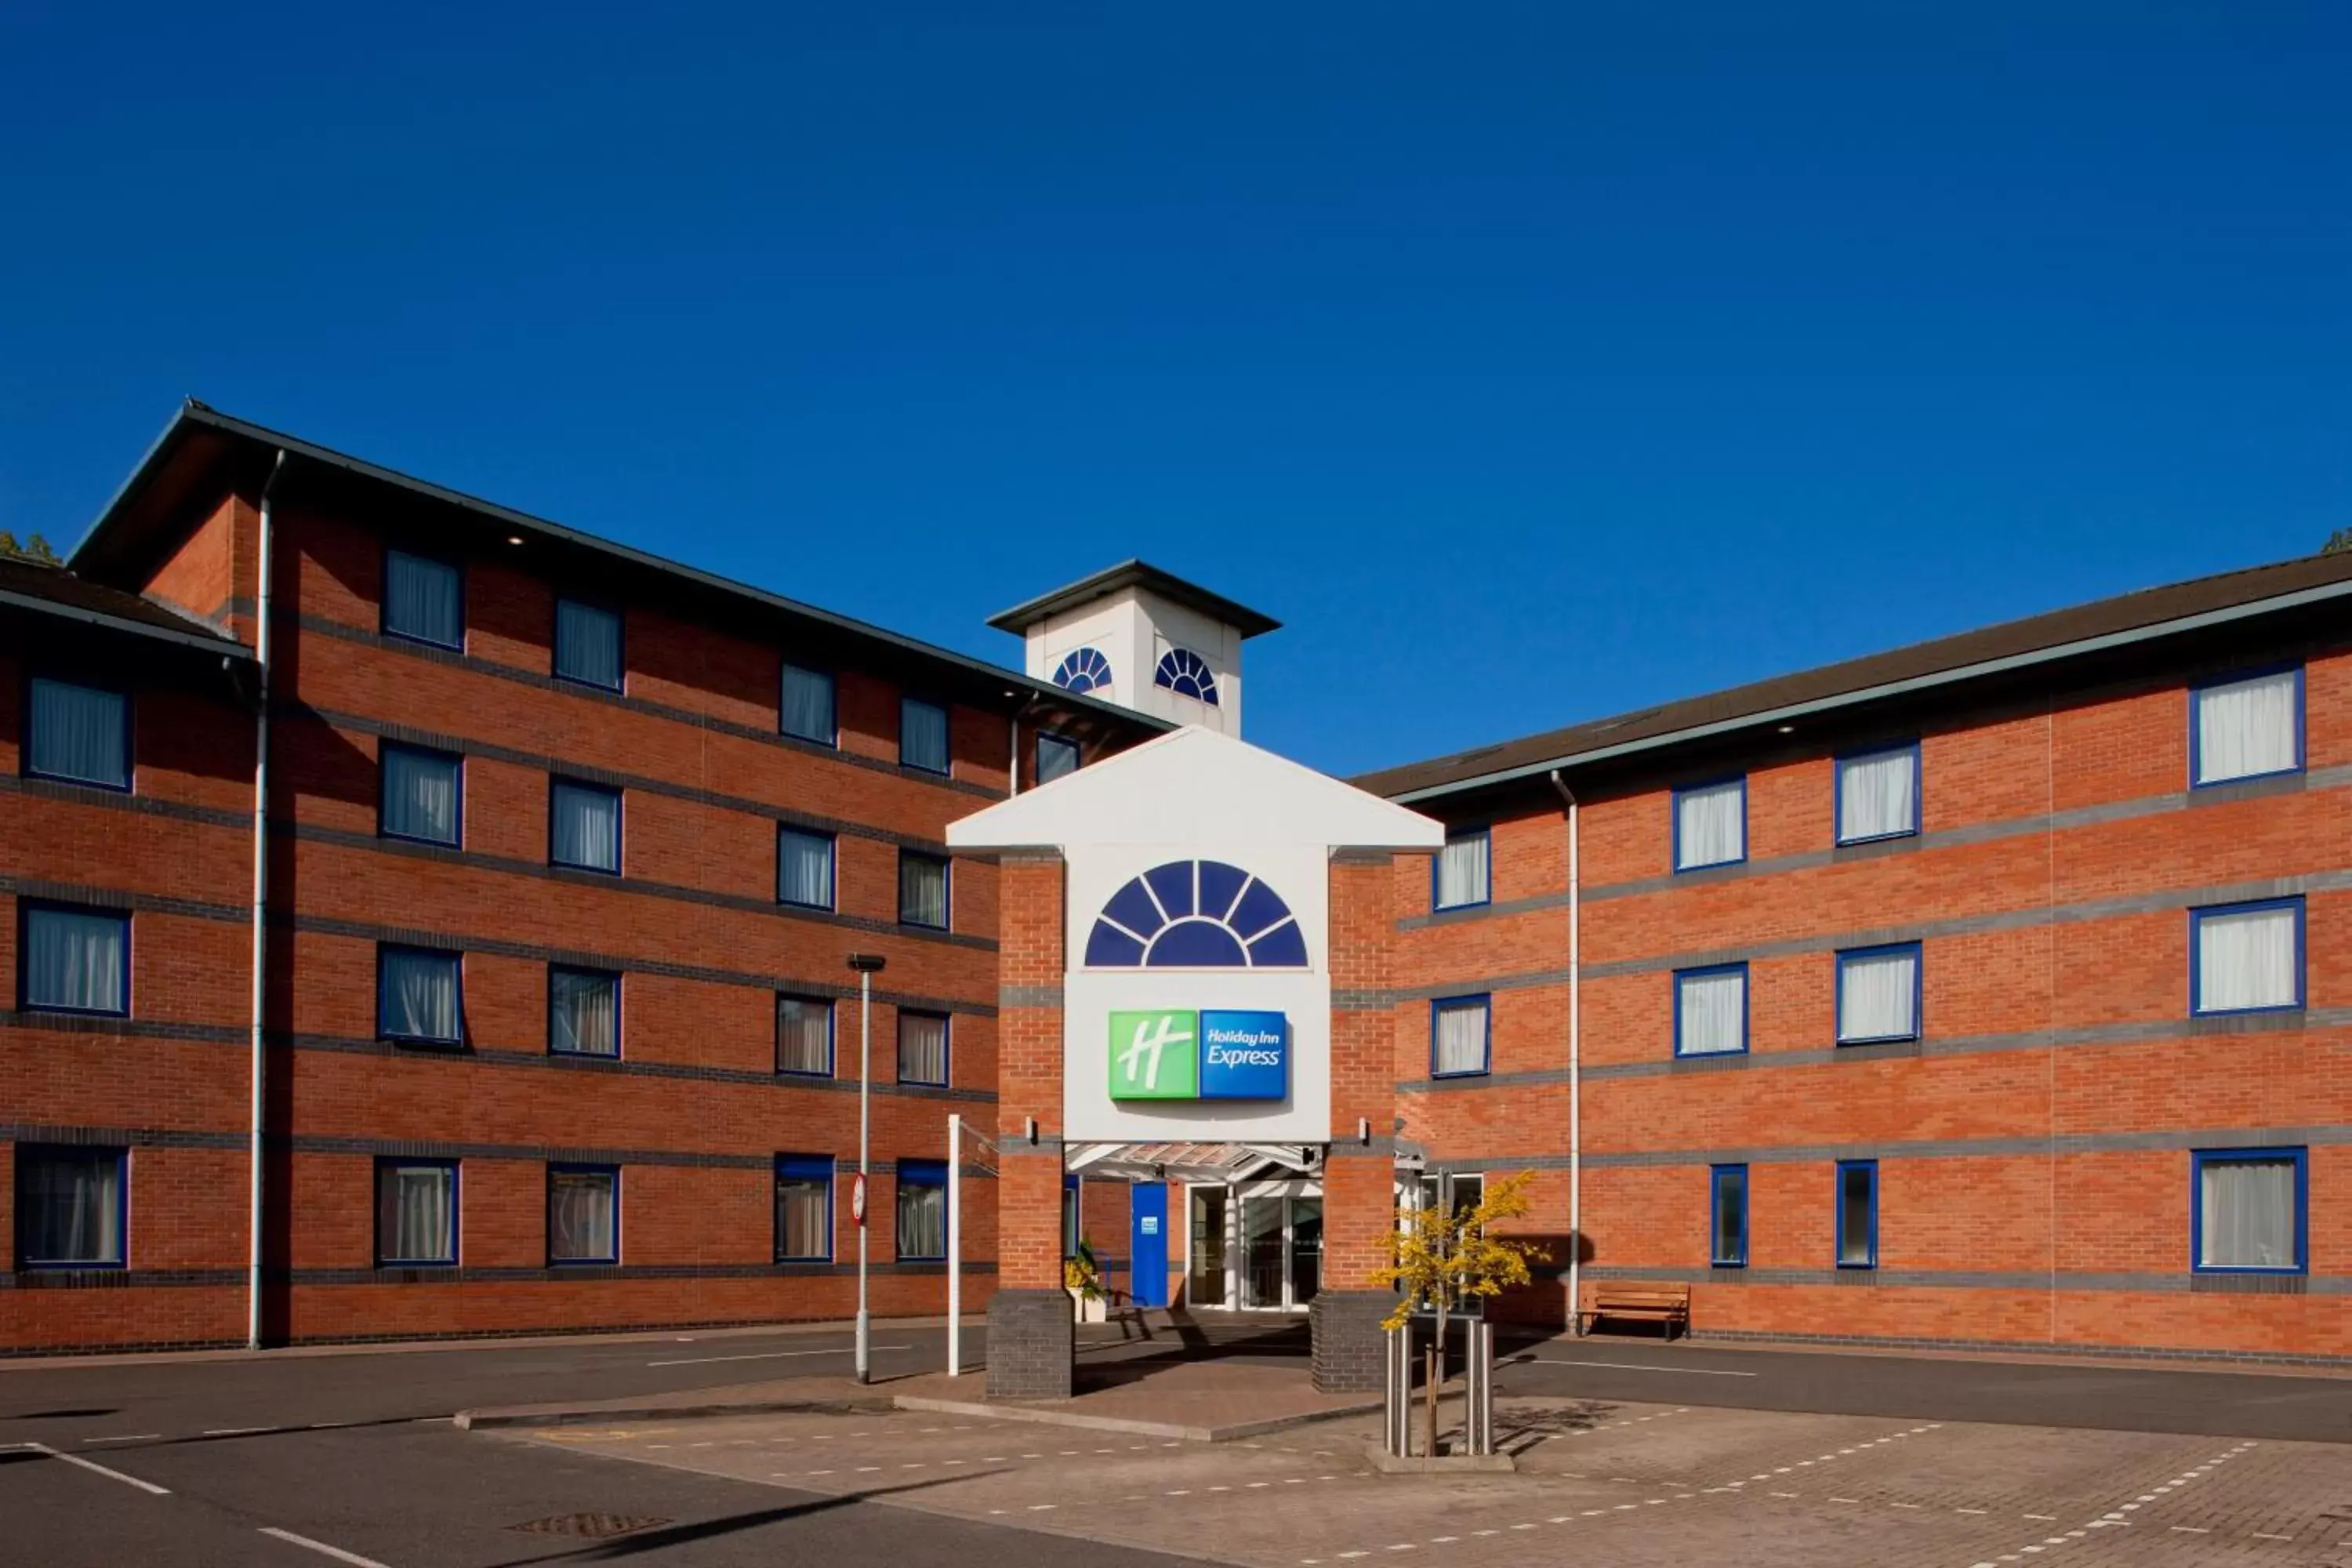 Property Building in Holiday Inn Express Droitwich Spa, an IHG Hotel